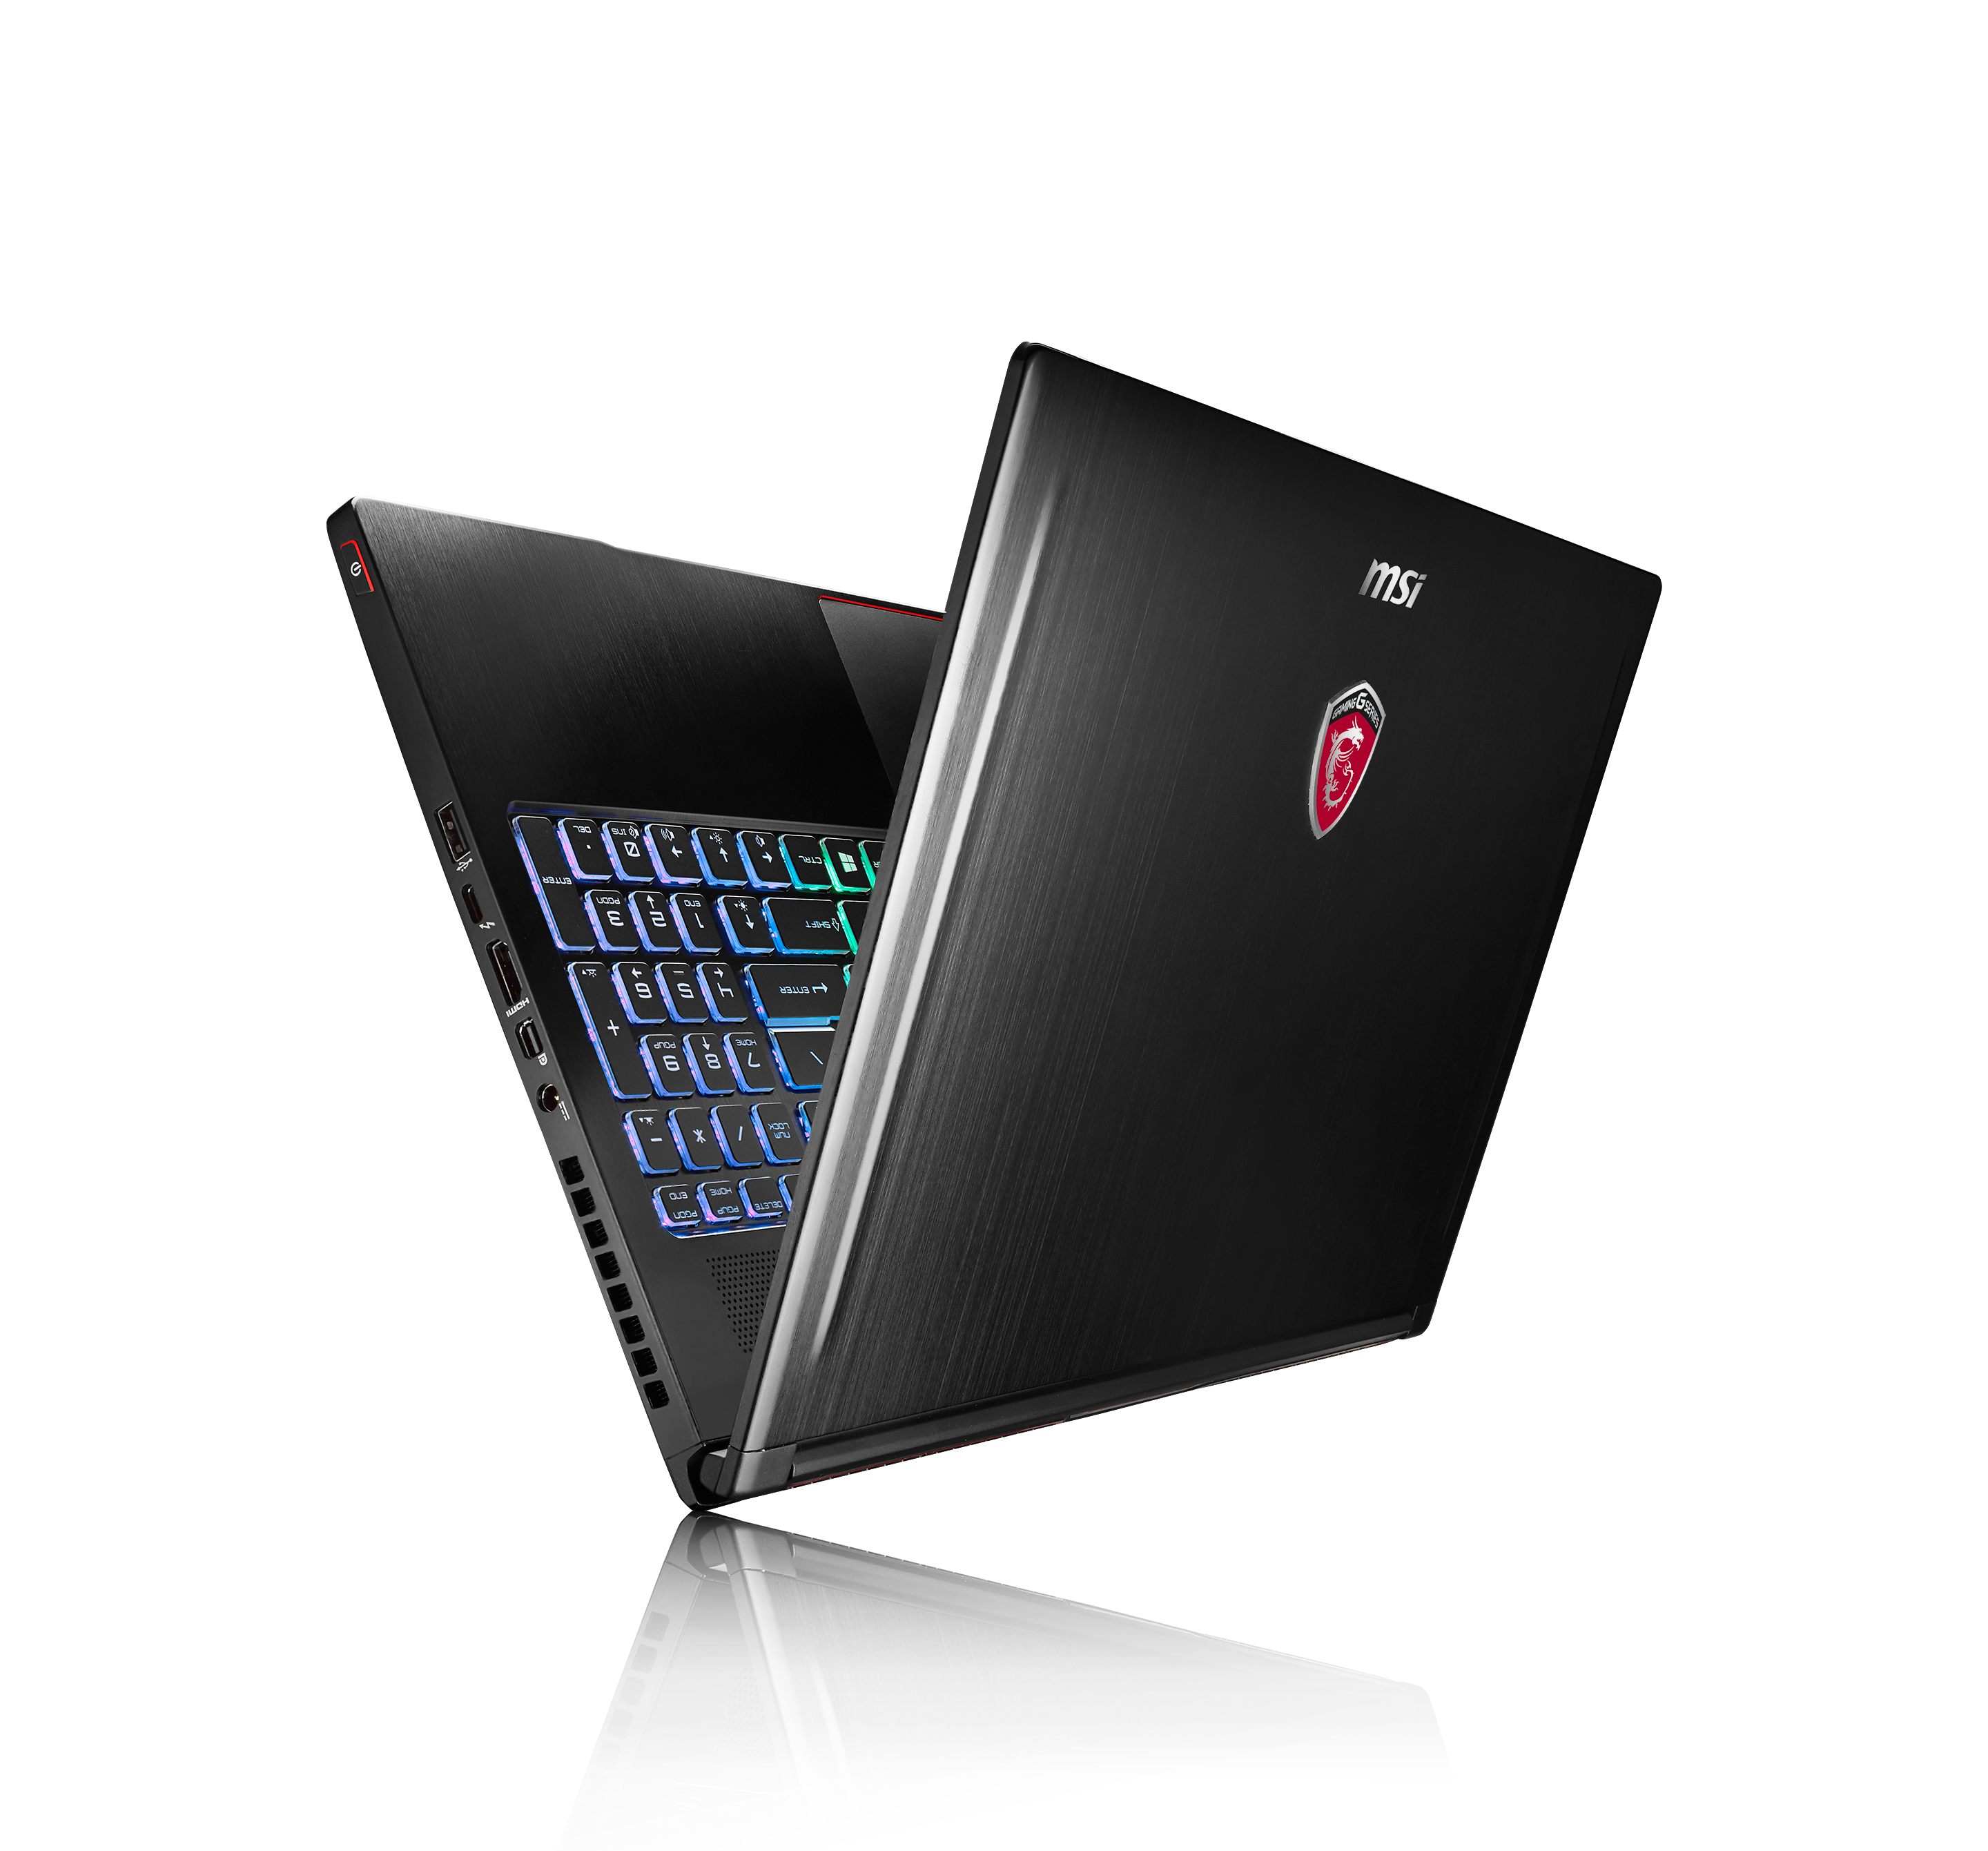 MSI GS63 Stealth Pro with Windows 10